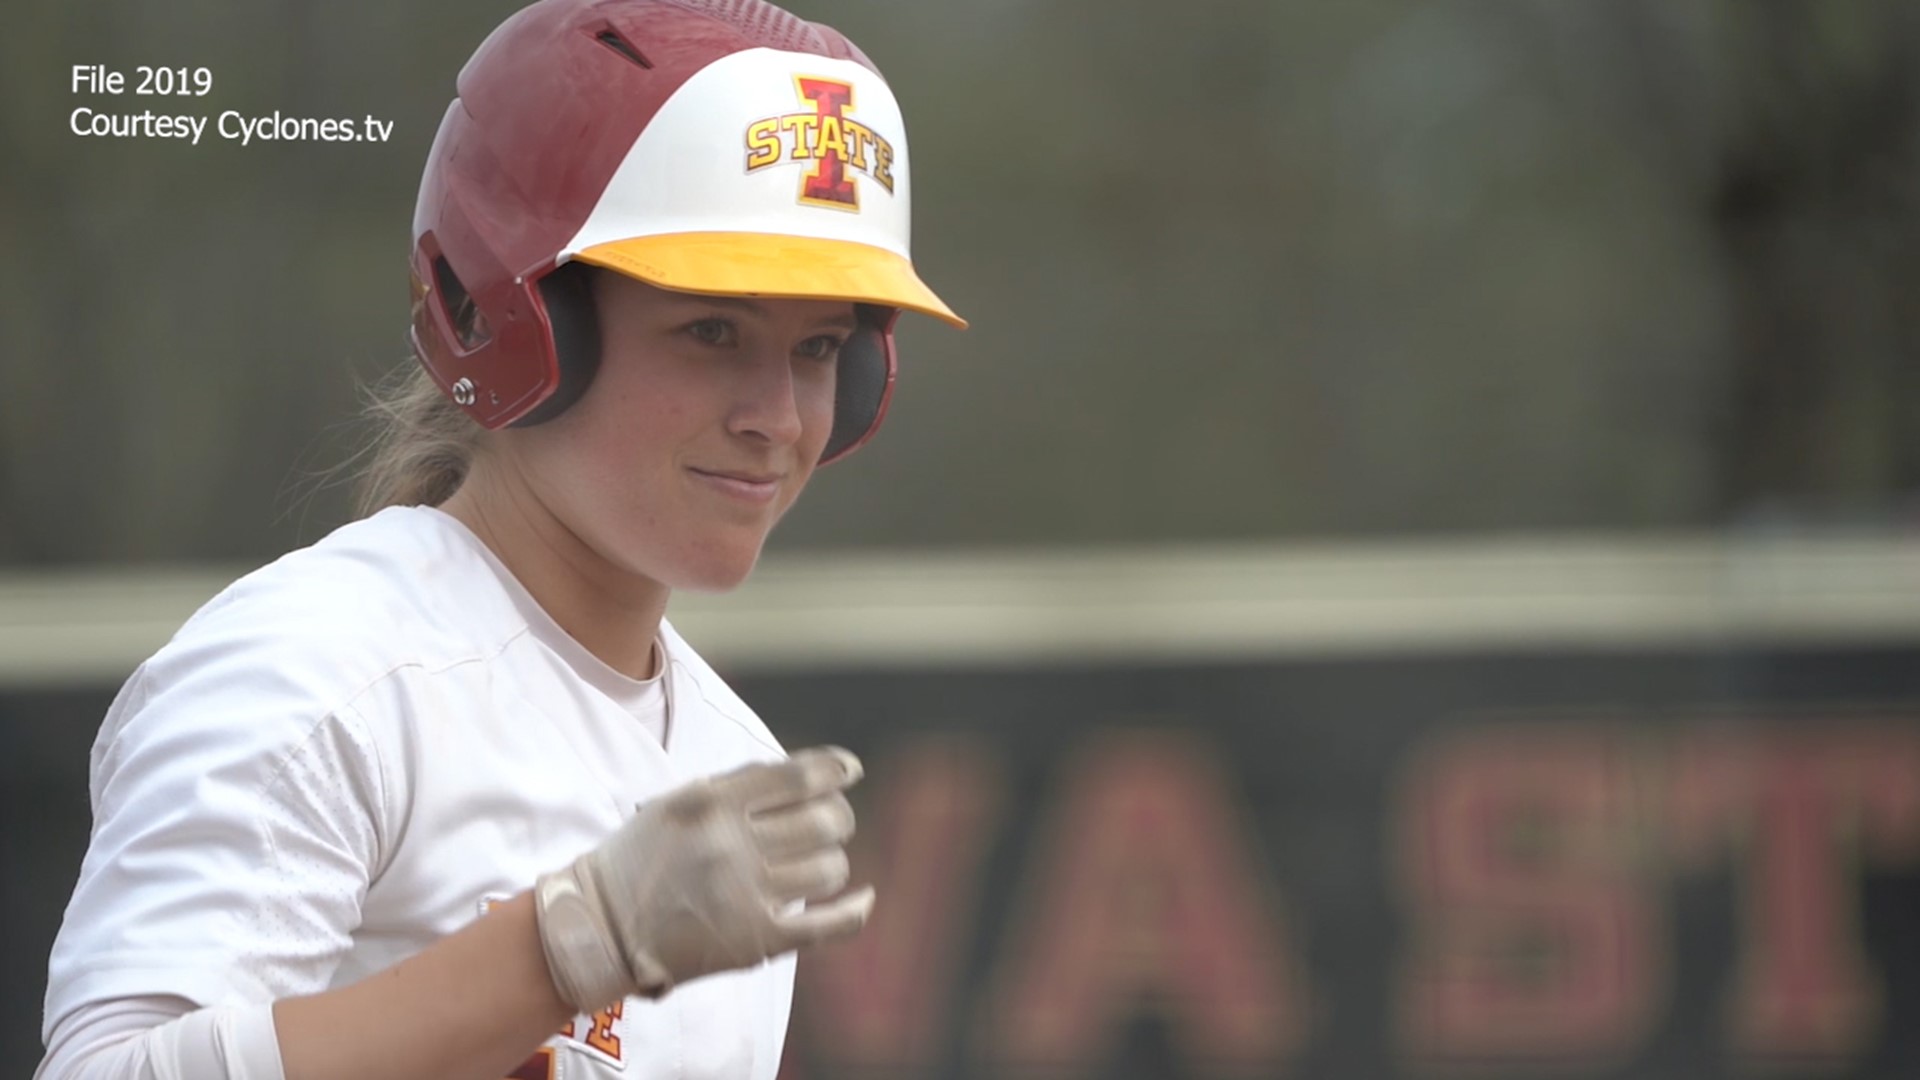 Sami Williams has helped lead the Cyclones to their first NFCA Ranking. #25 ISU is 9-1 to start the season and looking for more